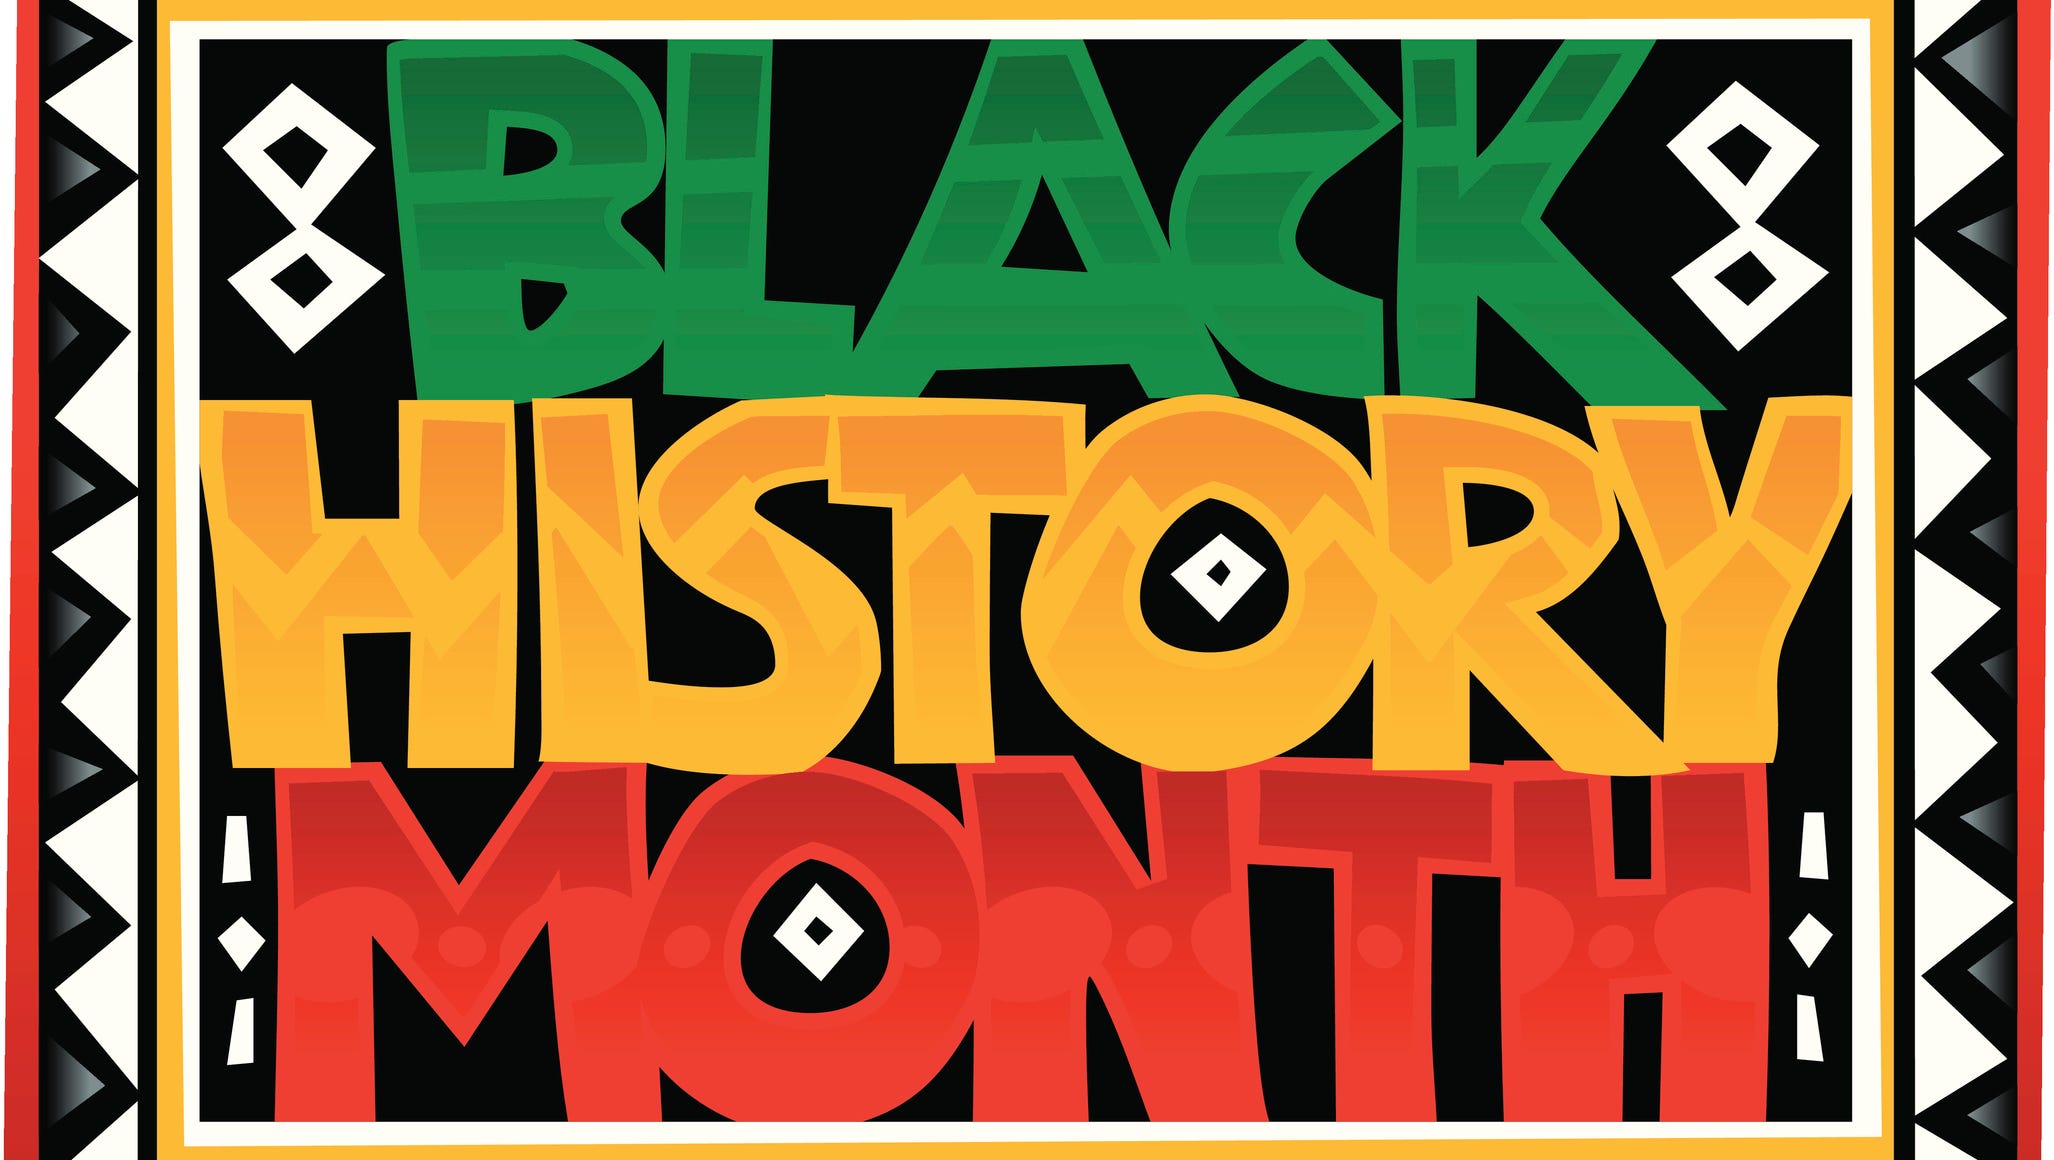 Black History Month events in the Greater Lansing area